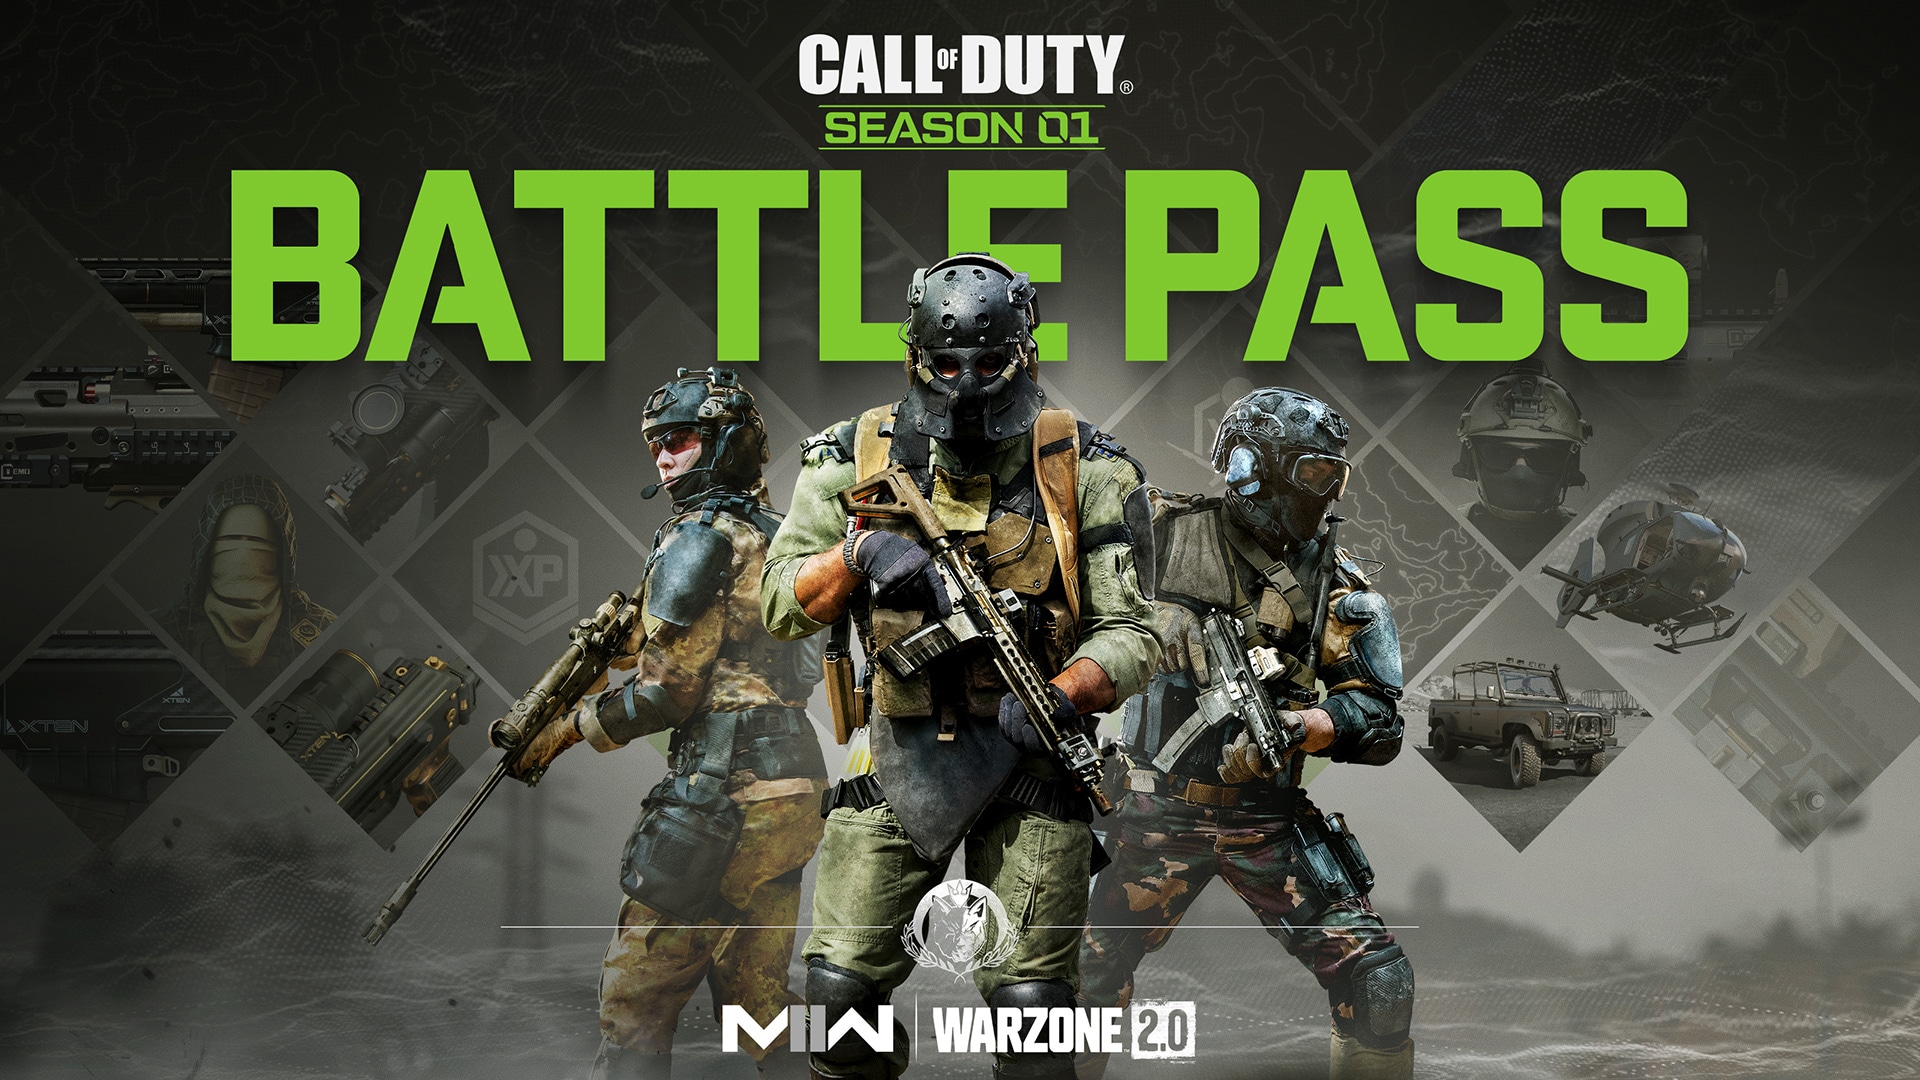 New Battle Pass System for Call of Duty: Modern Warfare II and Warzone 2.0 Season 01